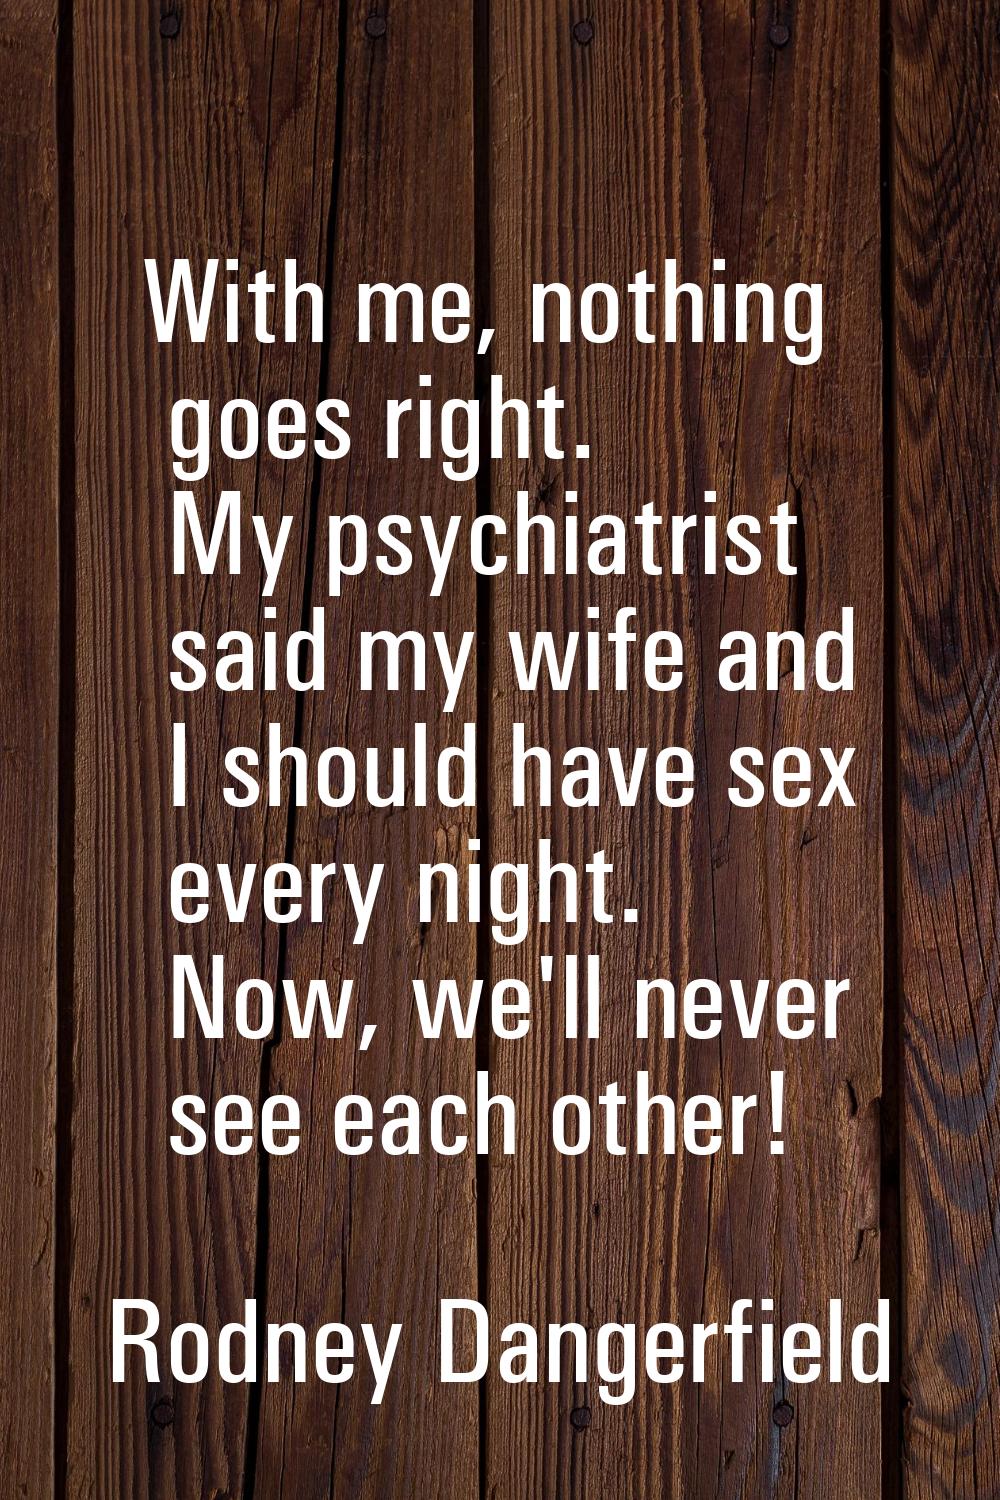 With me, nothing goes right. My psychiatrist said my wife and I should have sex every night. Now, w